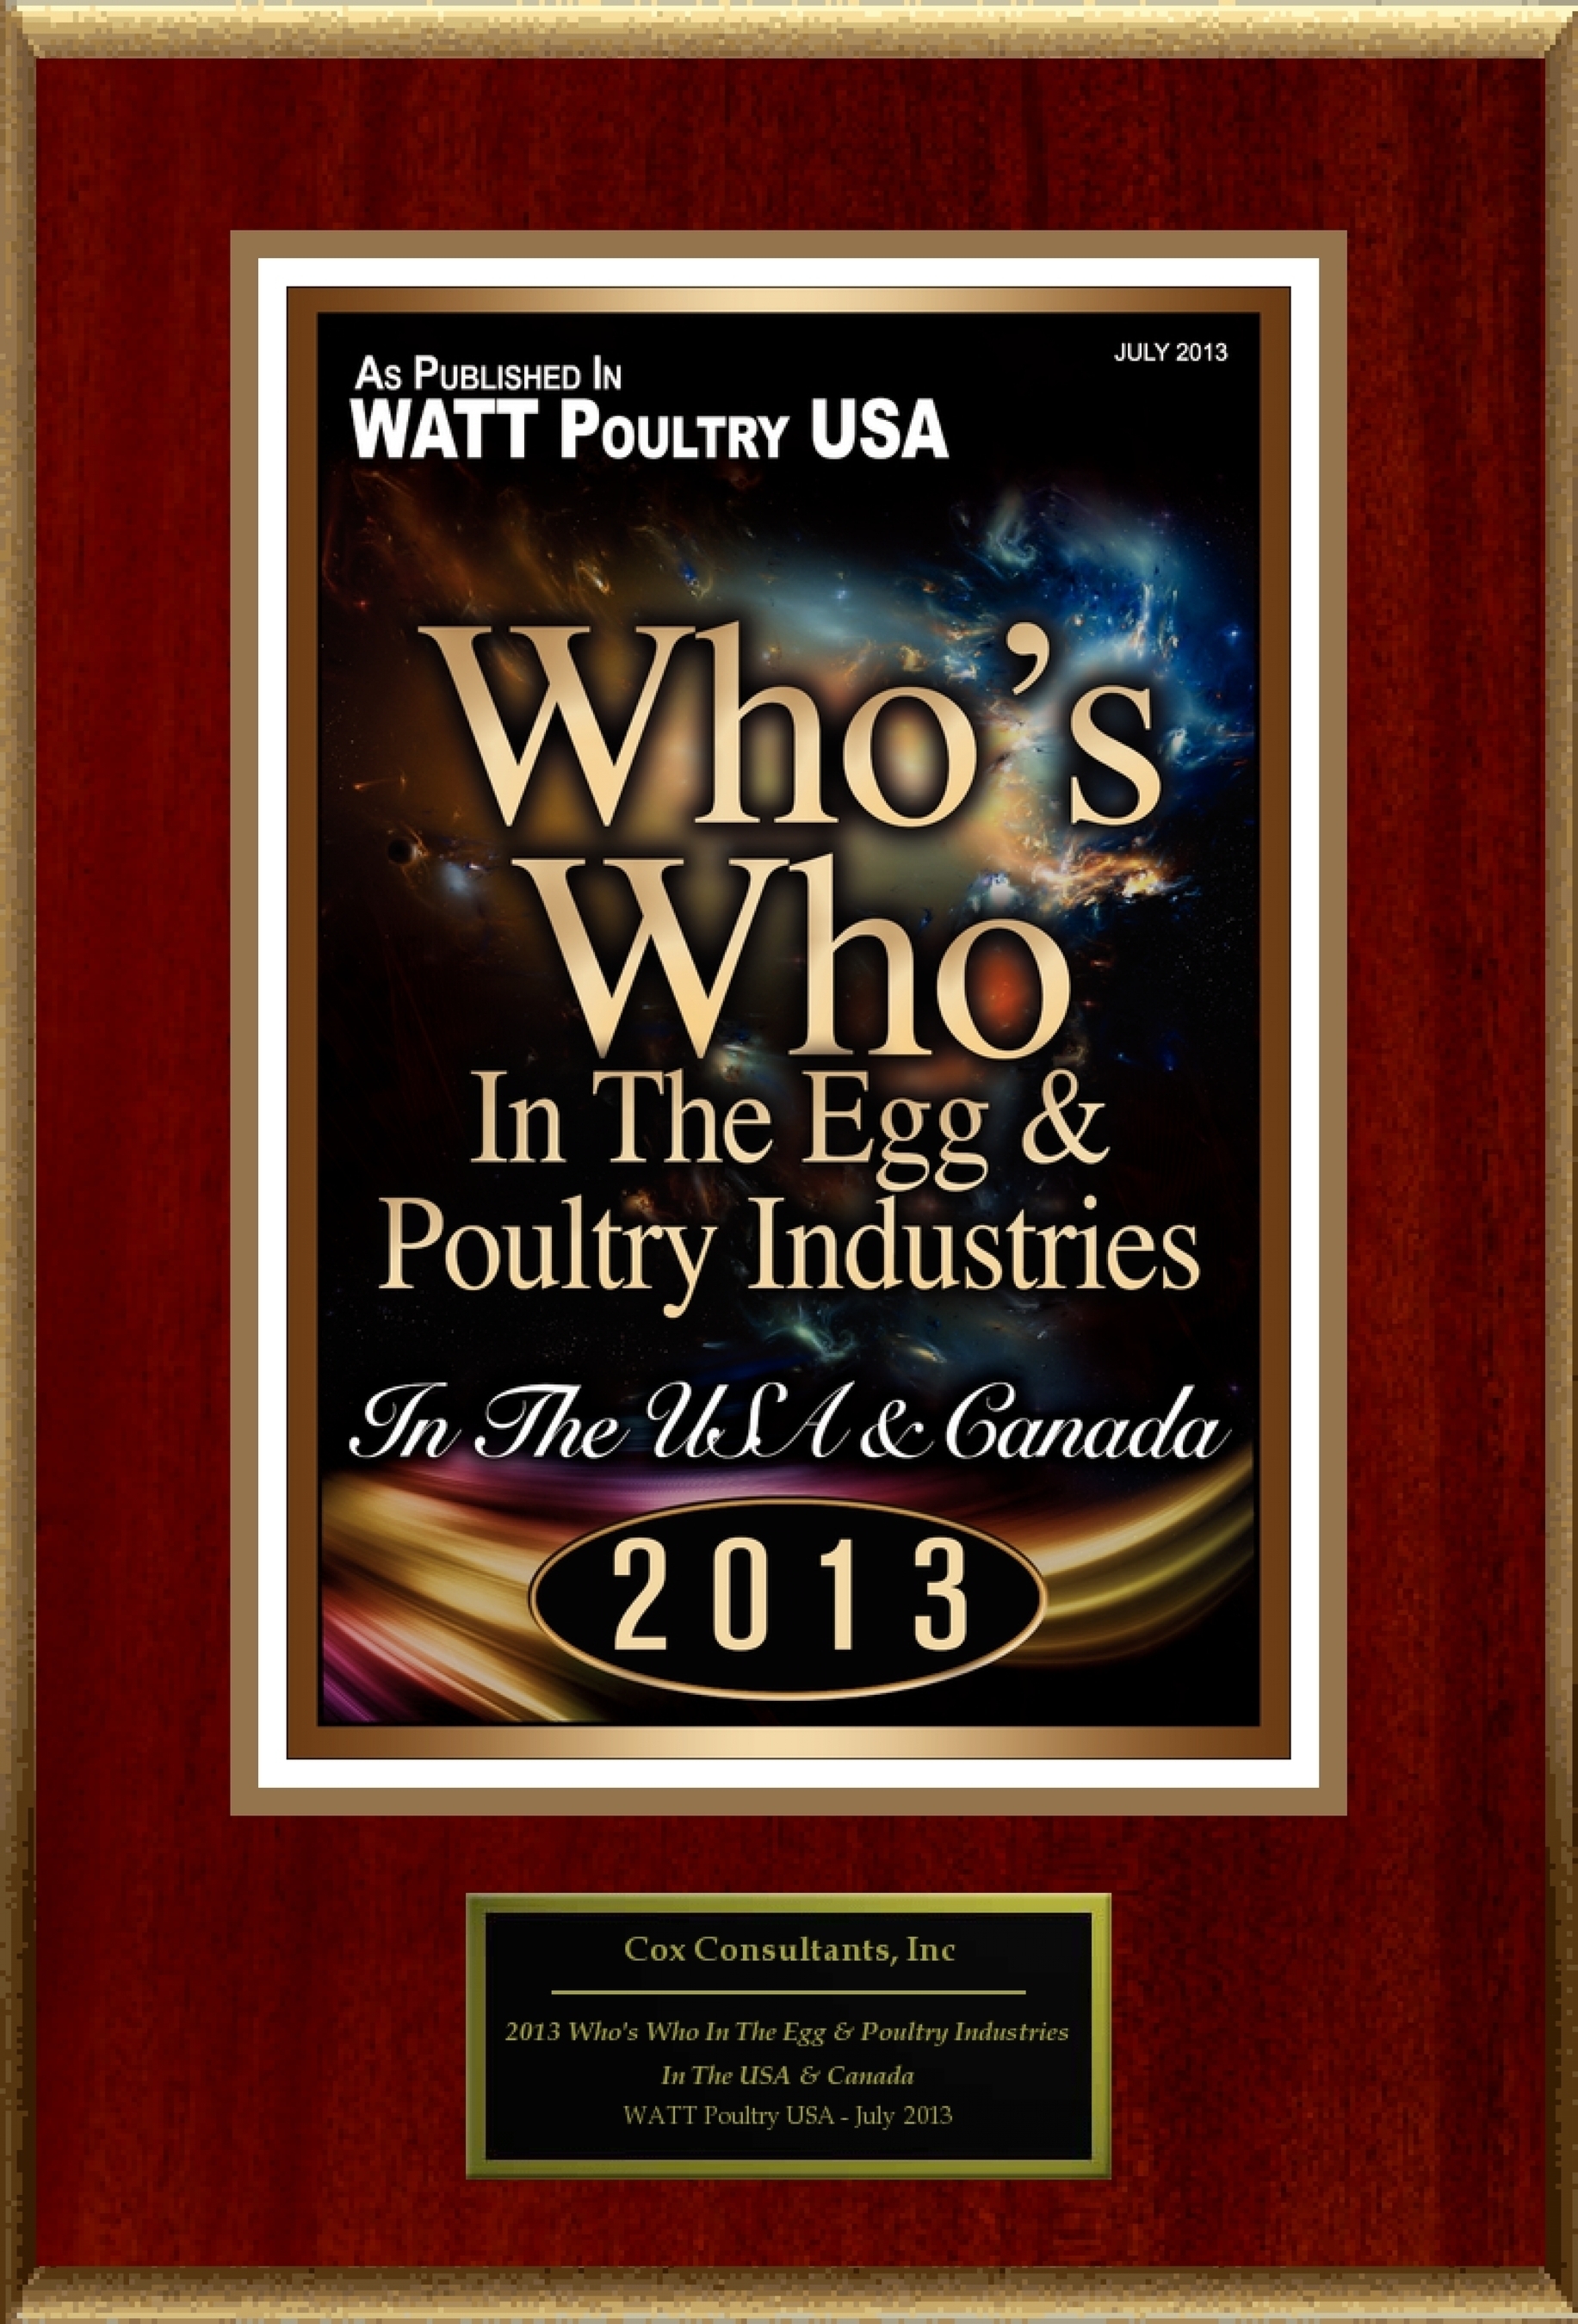 Cox Consultants, Inc Selected For "2013 Who's Who In The Egg & Poultry Industries" (PRNewsFoto/Cox Consultants, Inc )